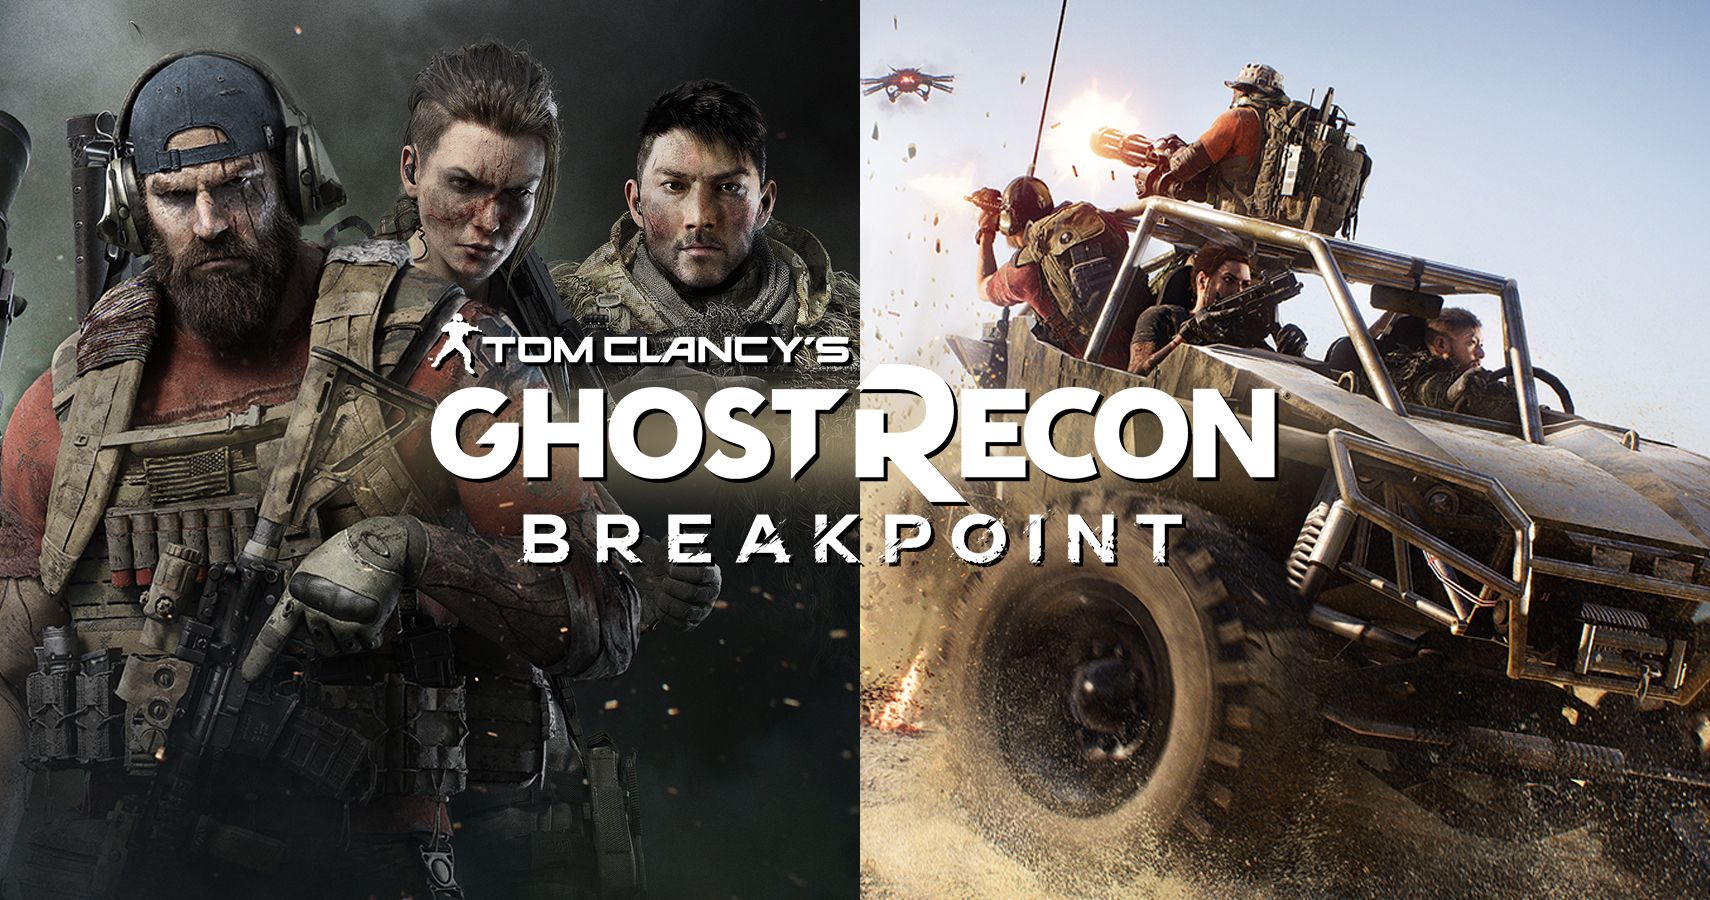 Ghost-Recon-Breakpoint-AI-Teammates-Feature-Image